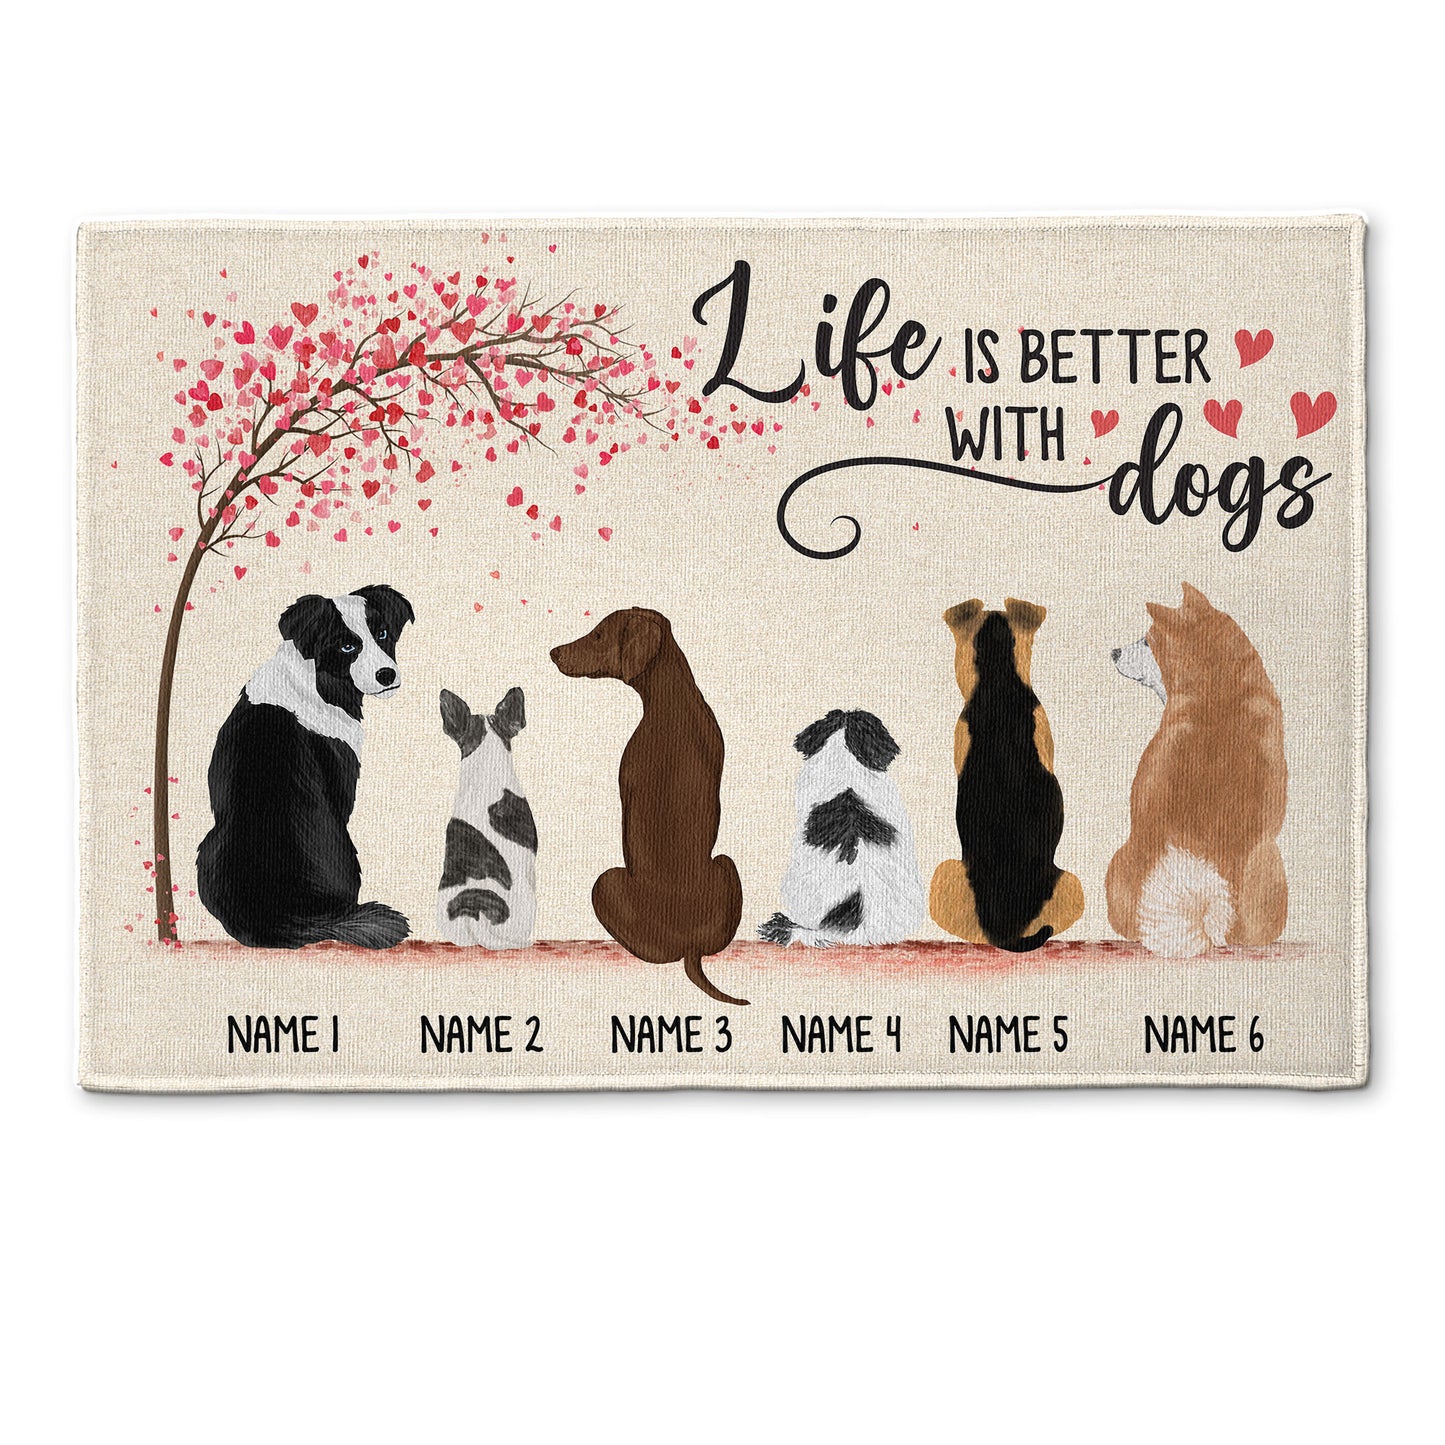 Life Is Better With Dogs - Personalized Doormat - Gift For Dog Lovers, Home Decor - Dog Back